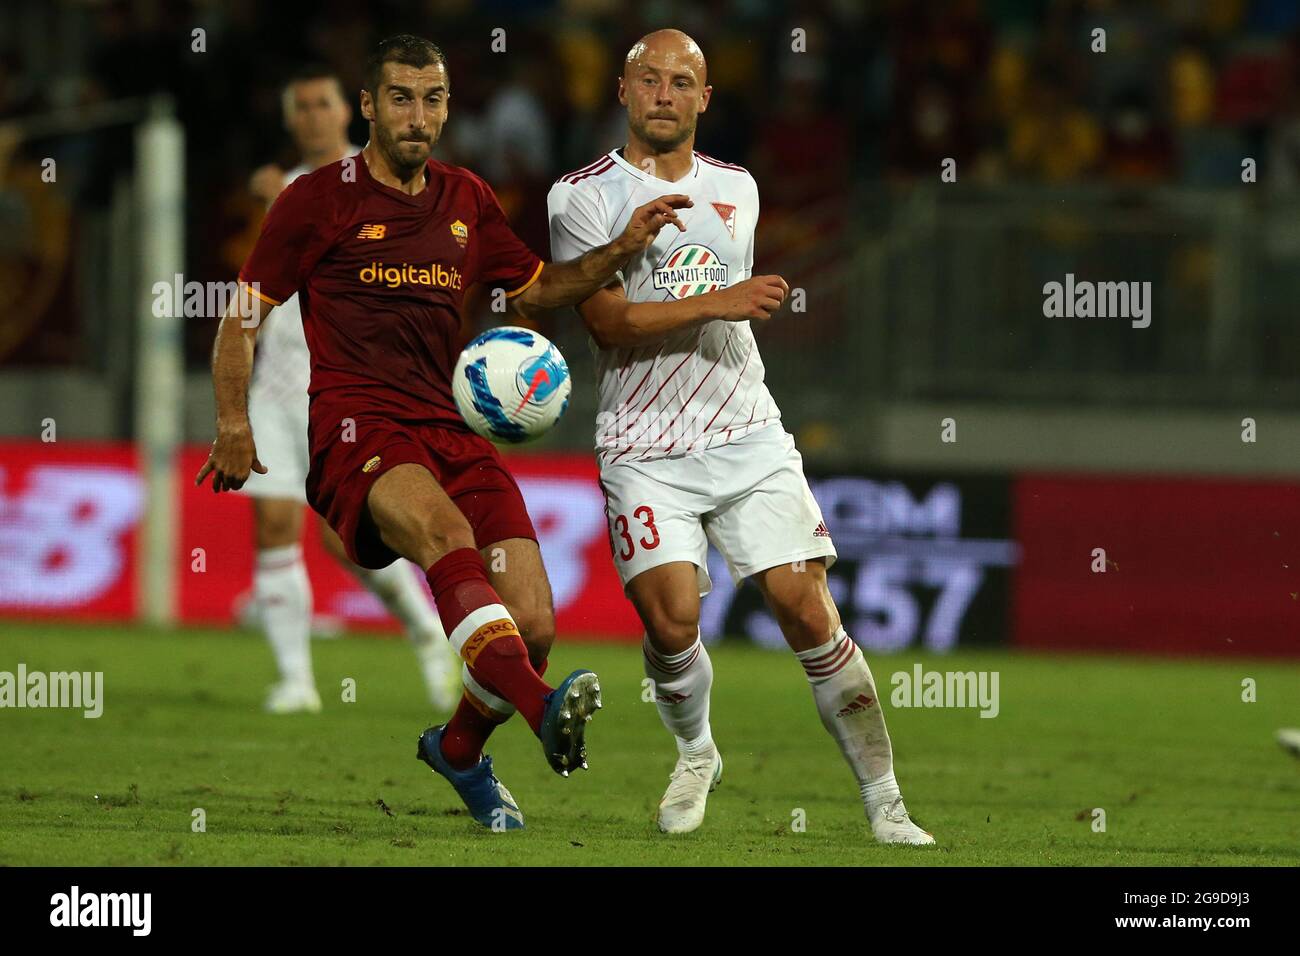 Frosinone, Italy. 25th July, 2021. Frosinone, Italy July 25 2021. Henrix Mkhitaryan (Roma) and Jozsef Varga (Debrecen) compete for the ball during the friendly match between AS Roma and DVSC at Stadio Benito Stirpe. (Photo by Giuseppe Fama/Pacific Press) Credit: Pacific Press Media Production Corp./Alamy Live News Stock Photo